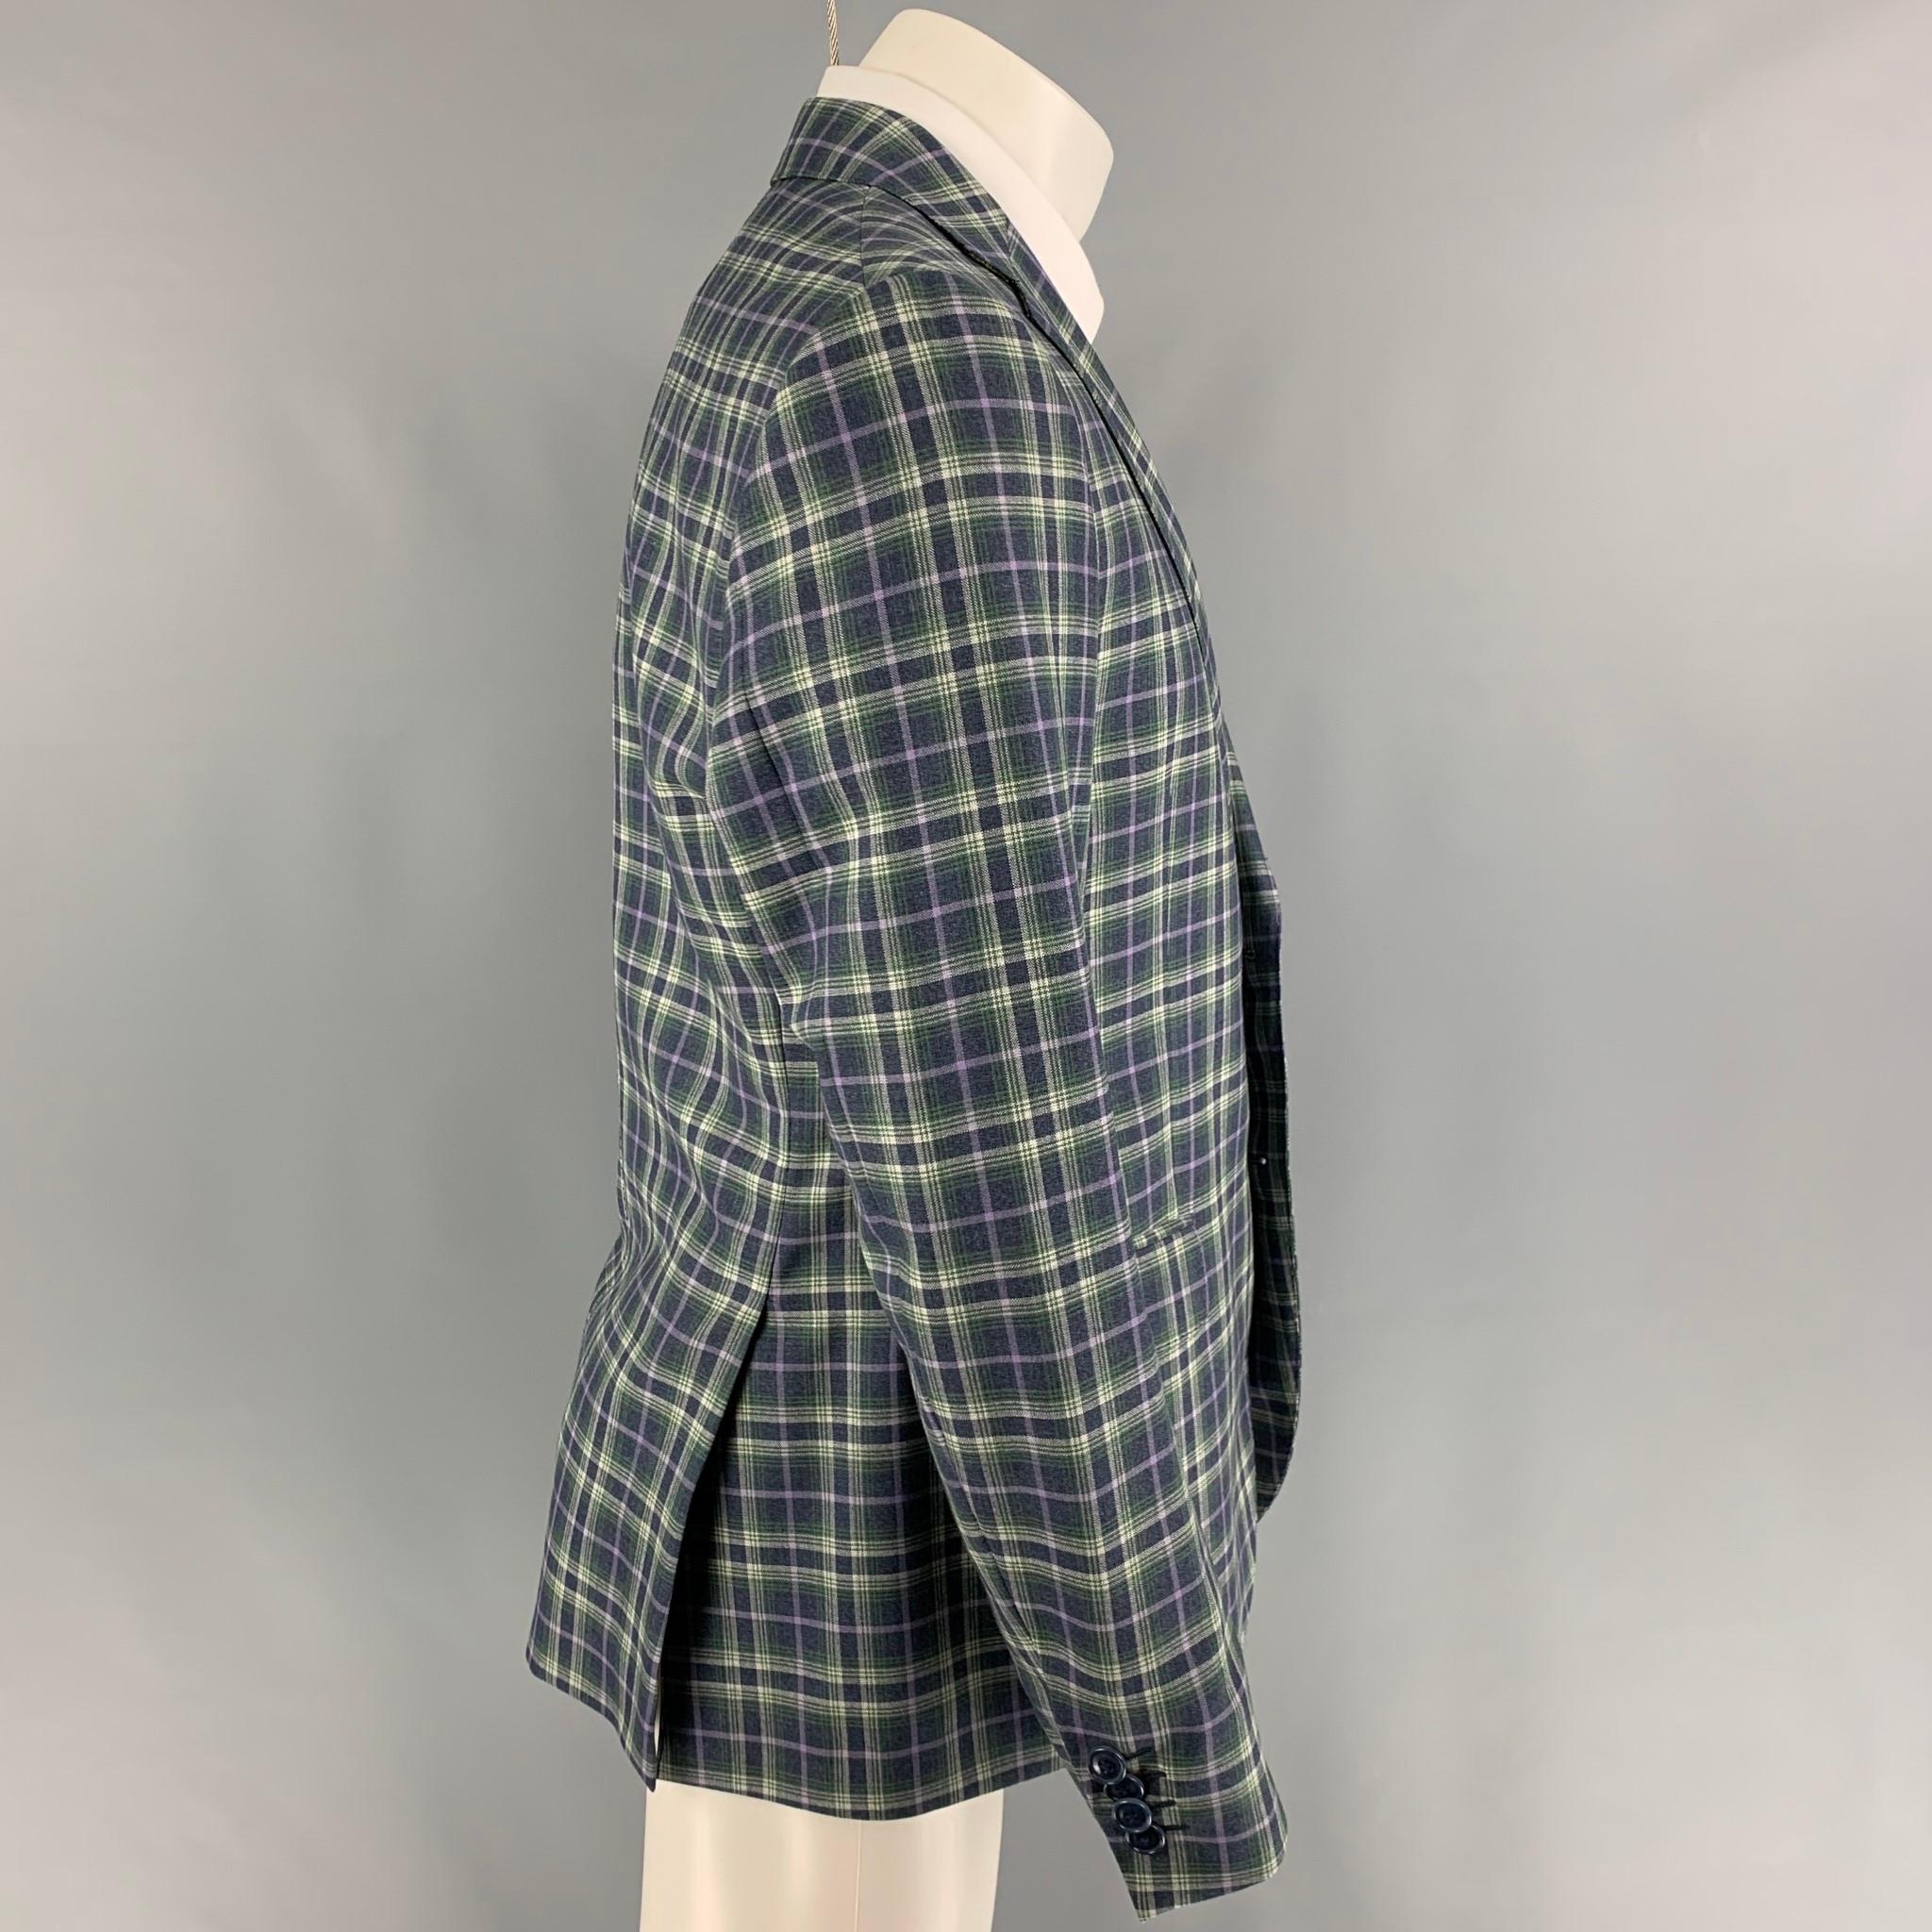 ETRO sport coat comes in a green & purple plaid wool featuring a notch lapel, flap pockets, double back vent, and a two button closure. Made in Italy. 

Very Good Pre-Owned Condition.
Marked: 50

Measurements:

Shoulder: 17.5 in.
Chest: 40